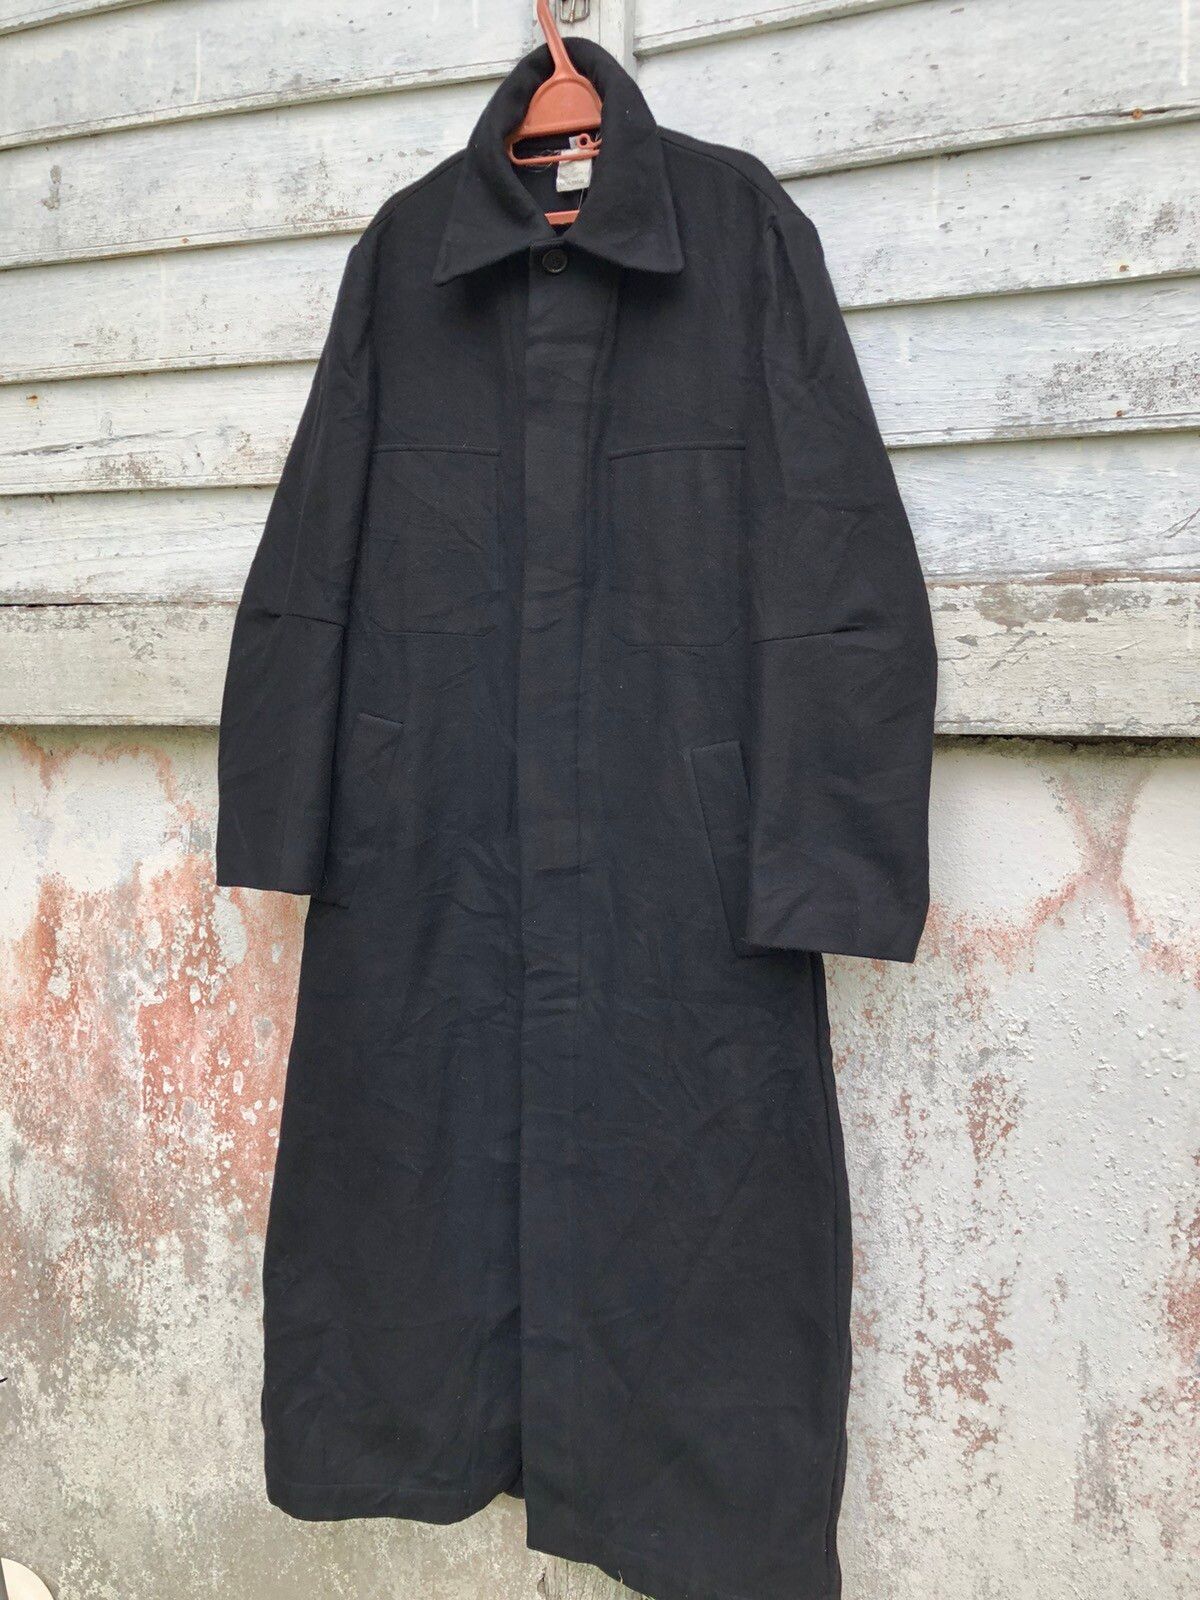 Ann Demeulemeester 💥Archived 💥Ann Demeulemeester Wool Overcoat Man In S Size US S / EU 44-46 / 1 - 2 Preview